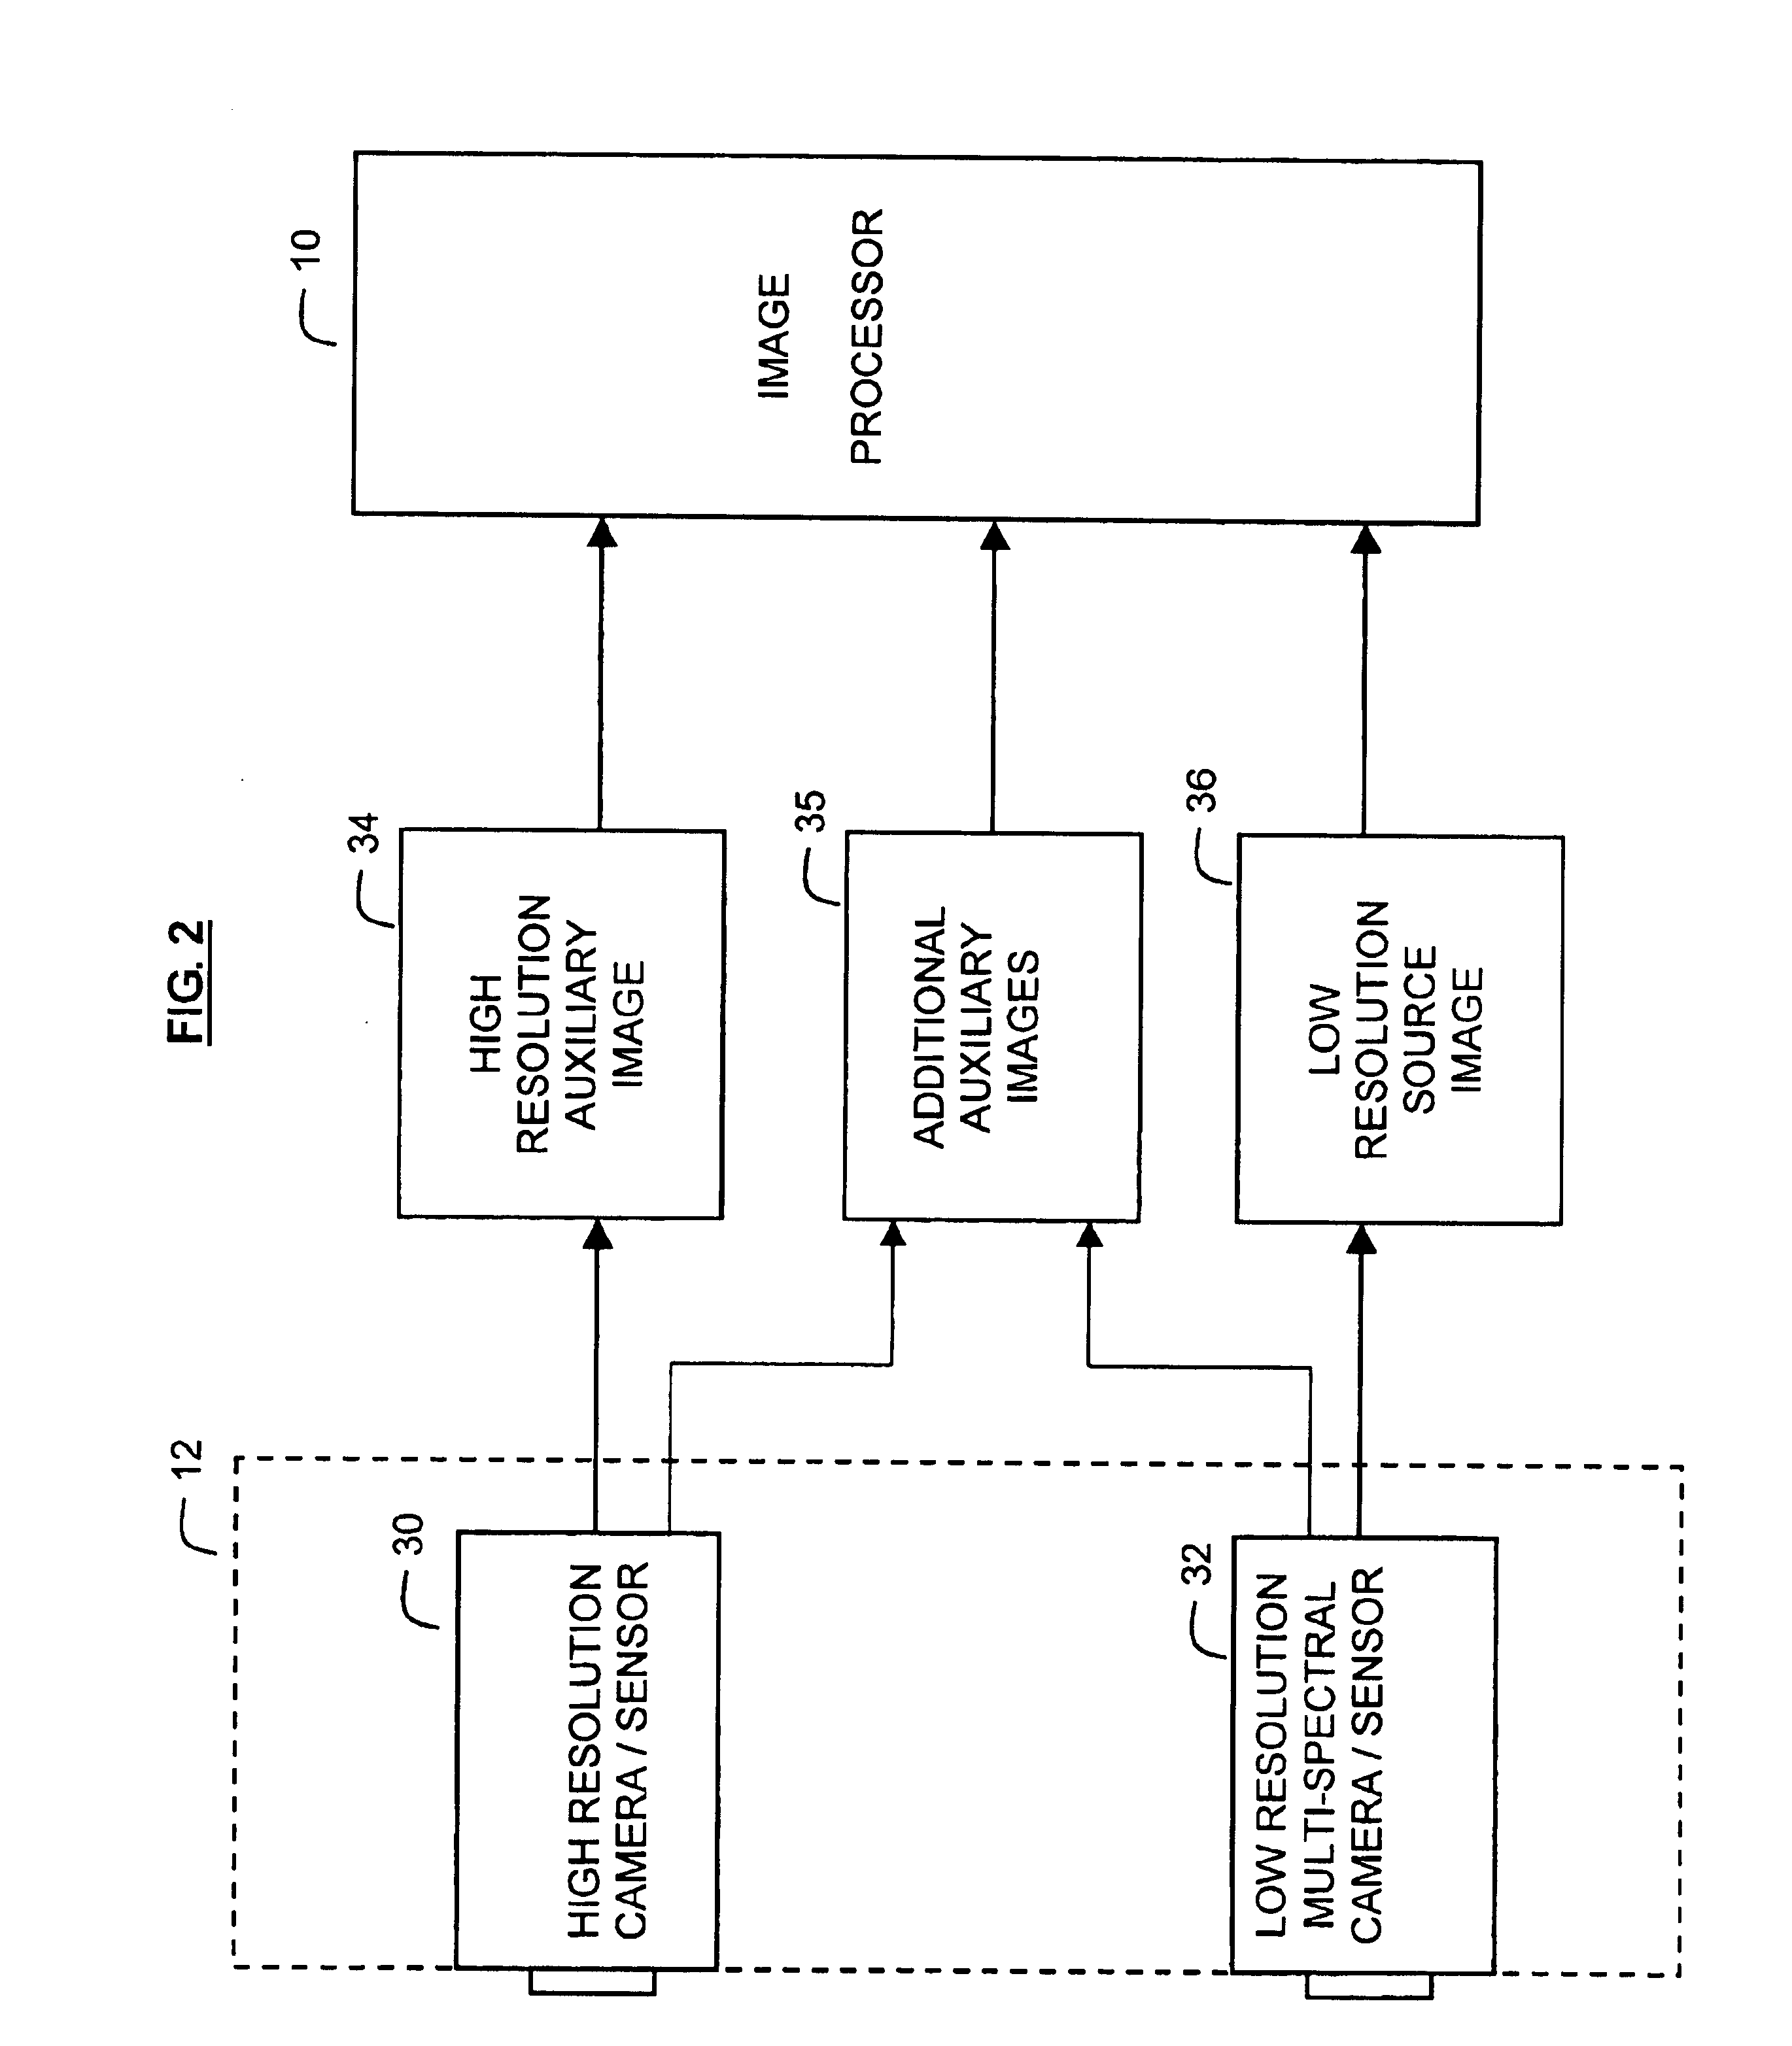 Apparatus and method for efficiently increasing the spatial resolution of images